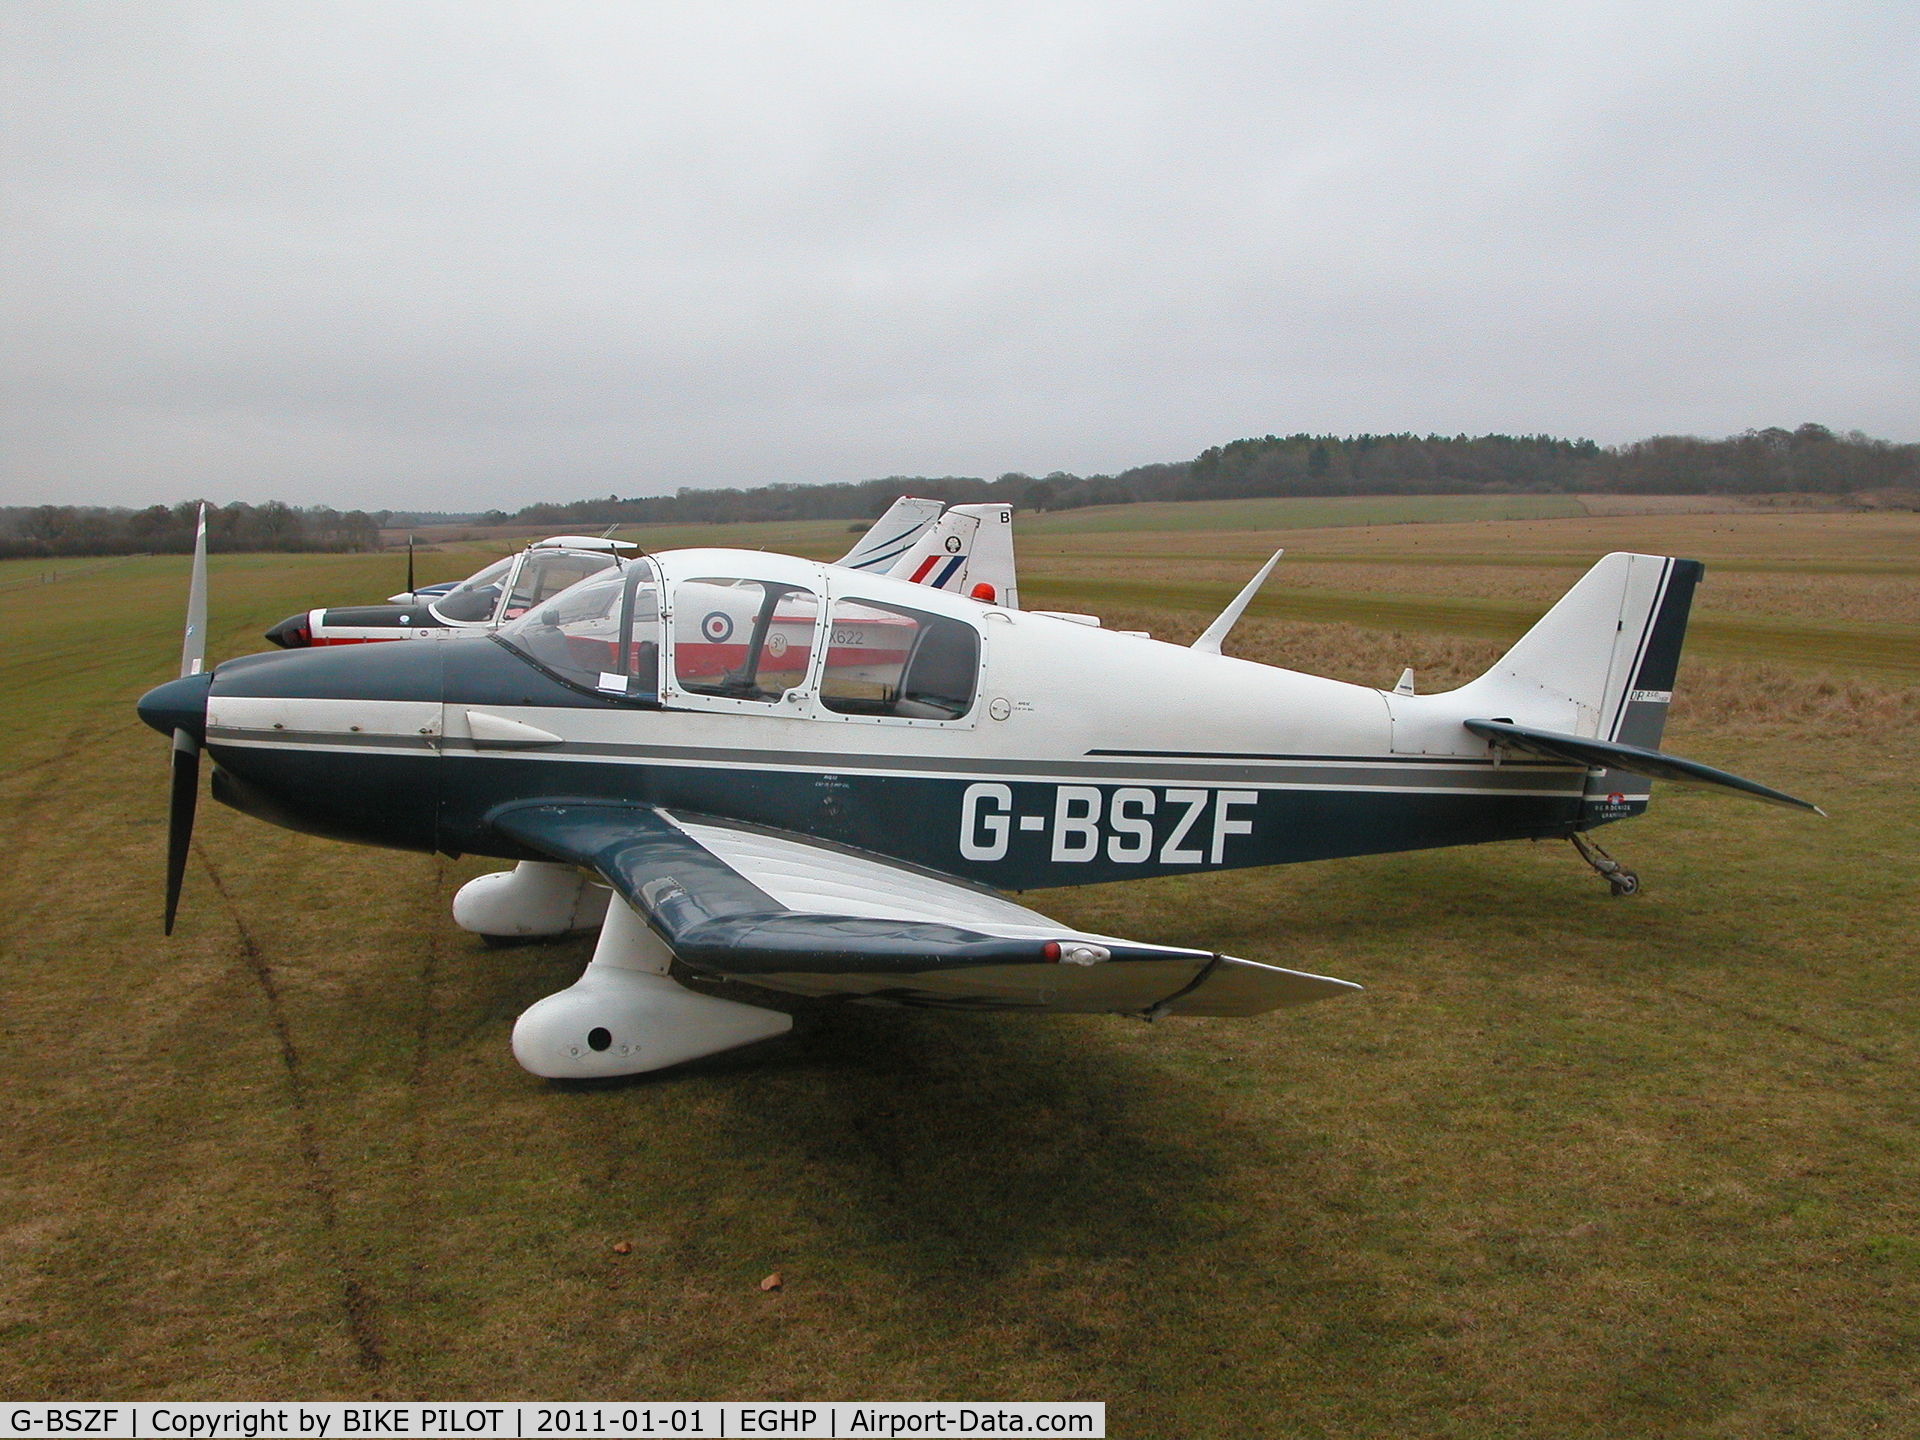 G-BSZF, 1965 CEA Jodel DR-250-160 Capitaine C/N 32, This Jodel flew in from Shoreham